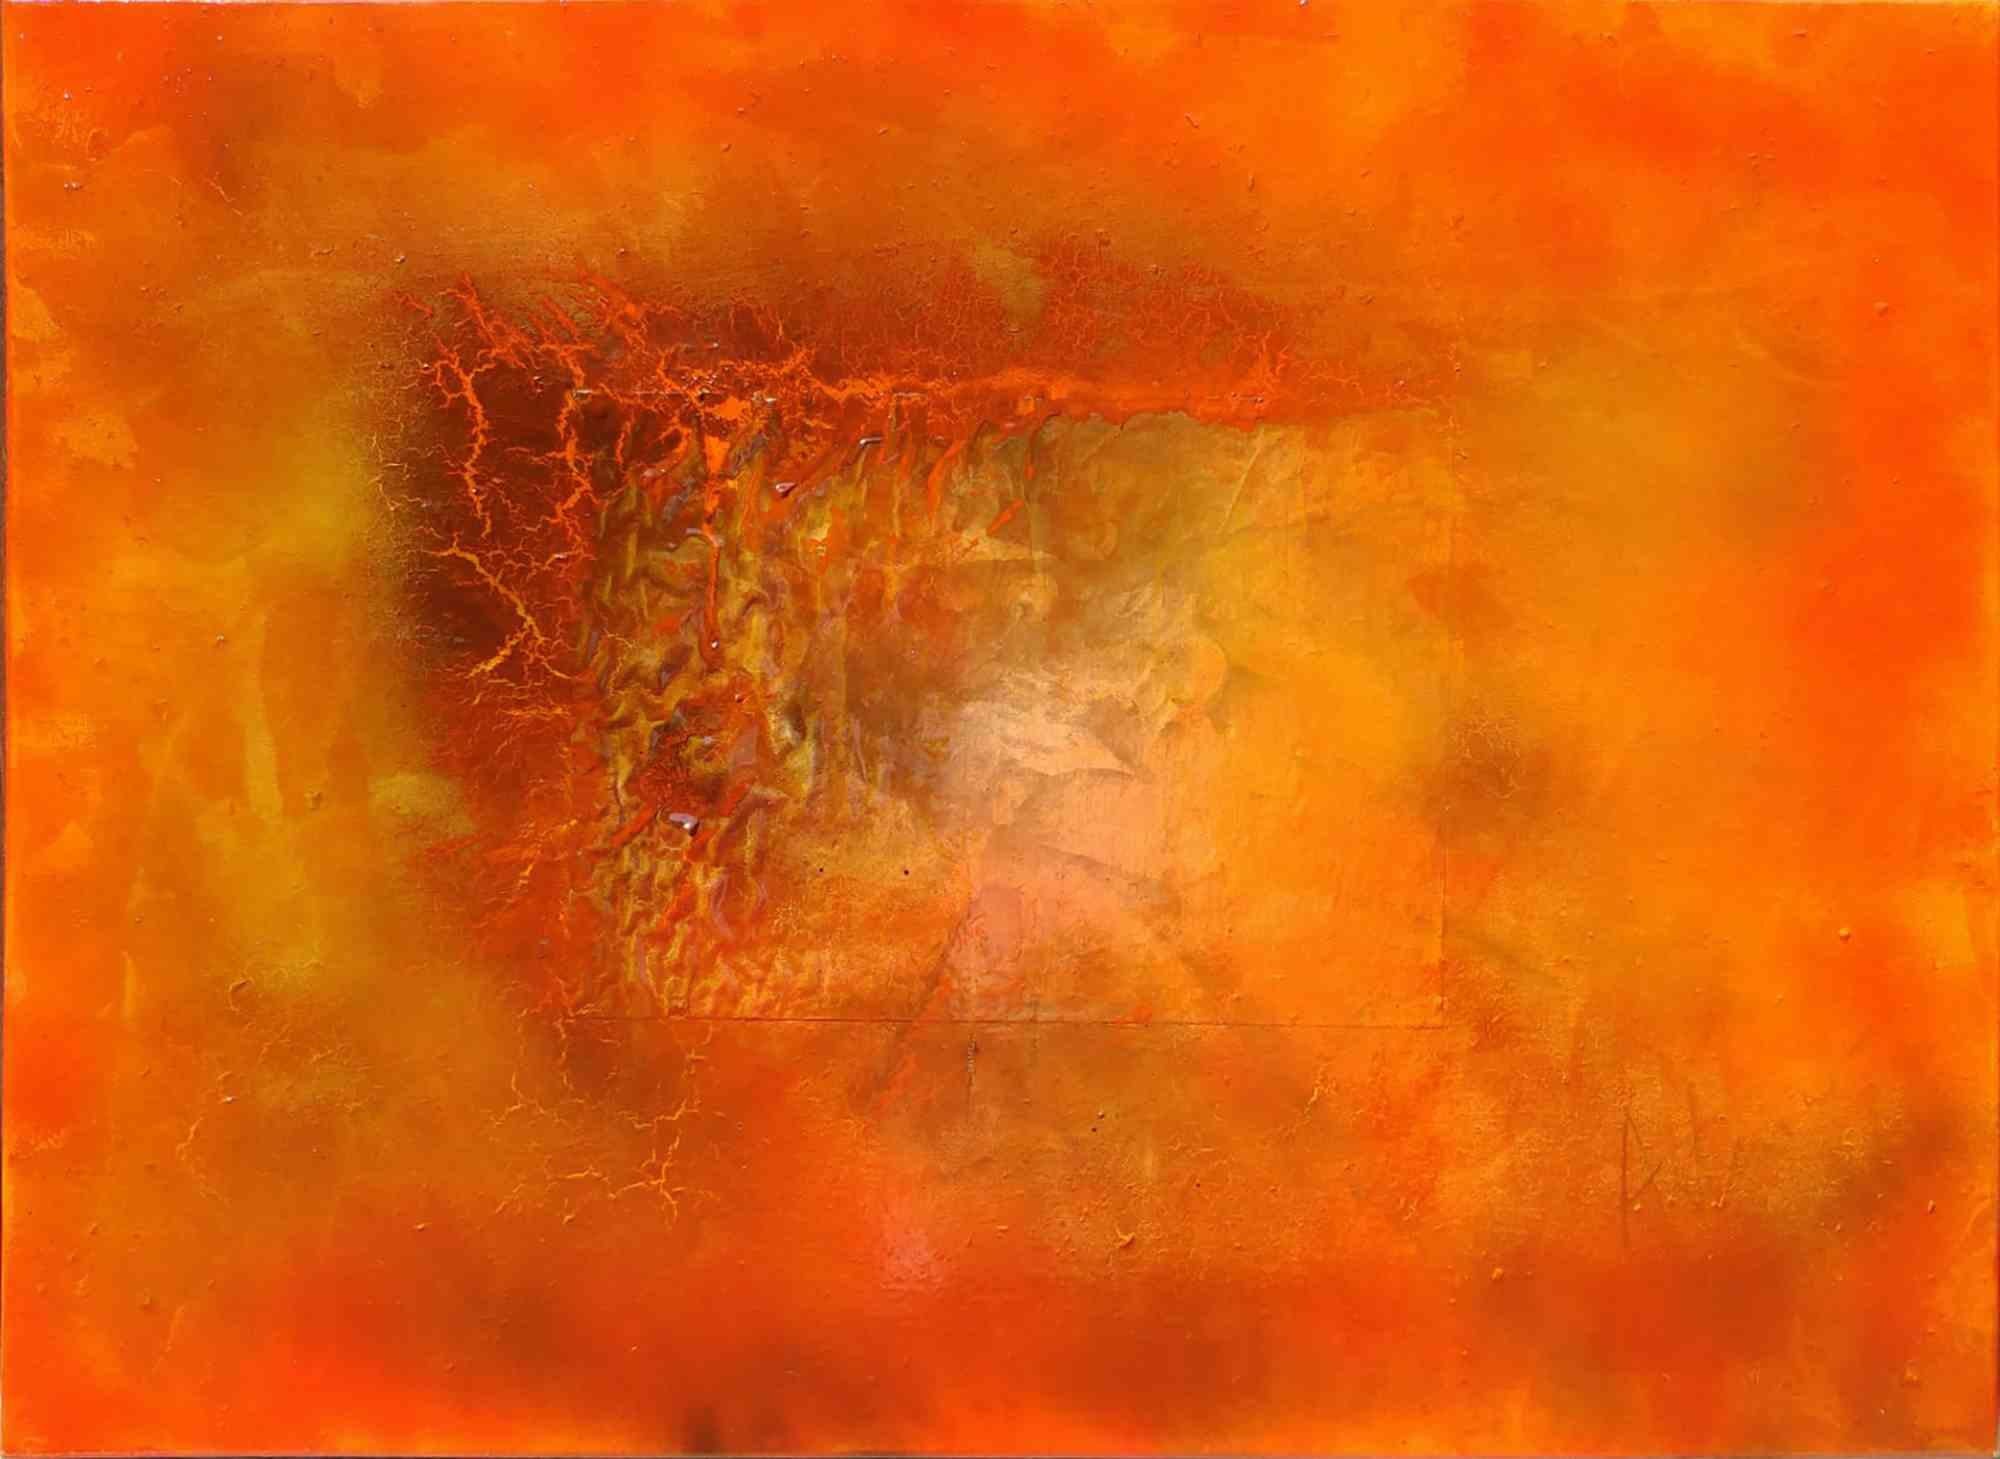 The work is entitled 'Scorci d'infinito red border n.5' and is part of the 'Scorci di infinito' series measuring 80 × 60 cm by the artist Artemio Ceresa. The technique is mixed media on canvas and the signature on the front is Artemio . The work is